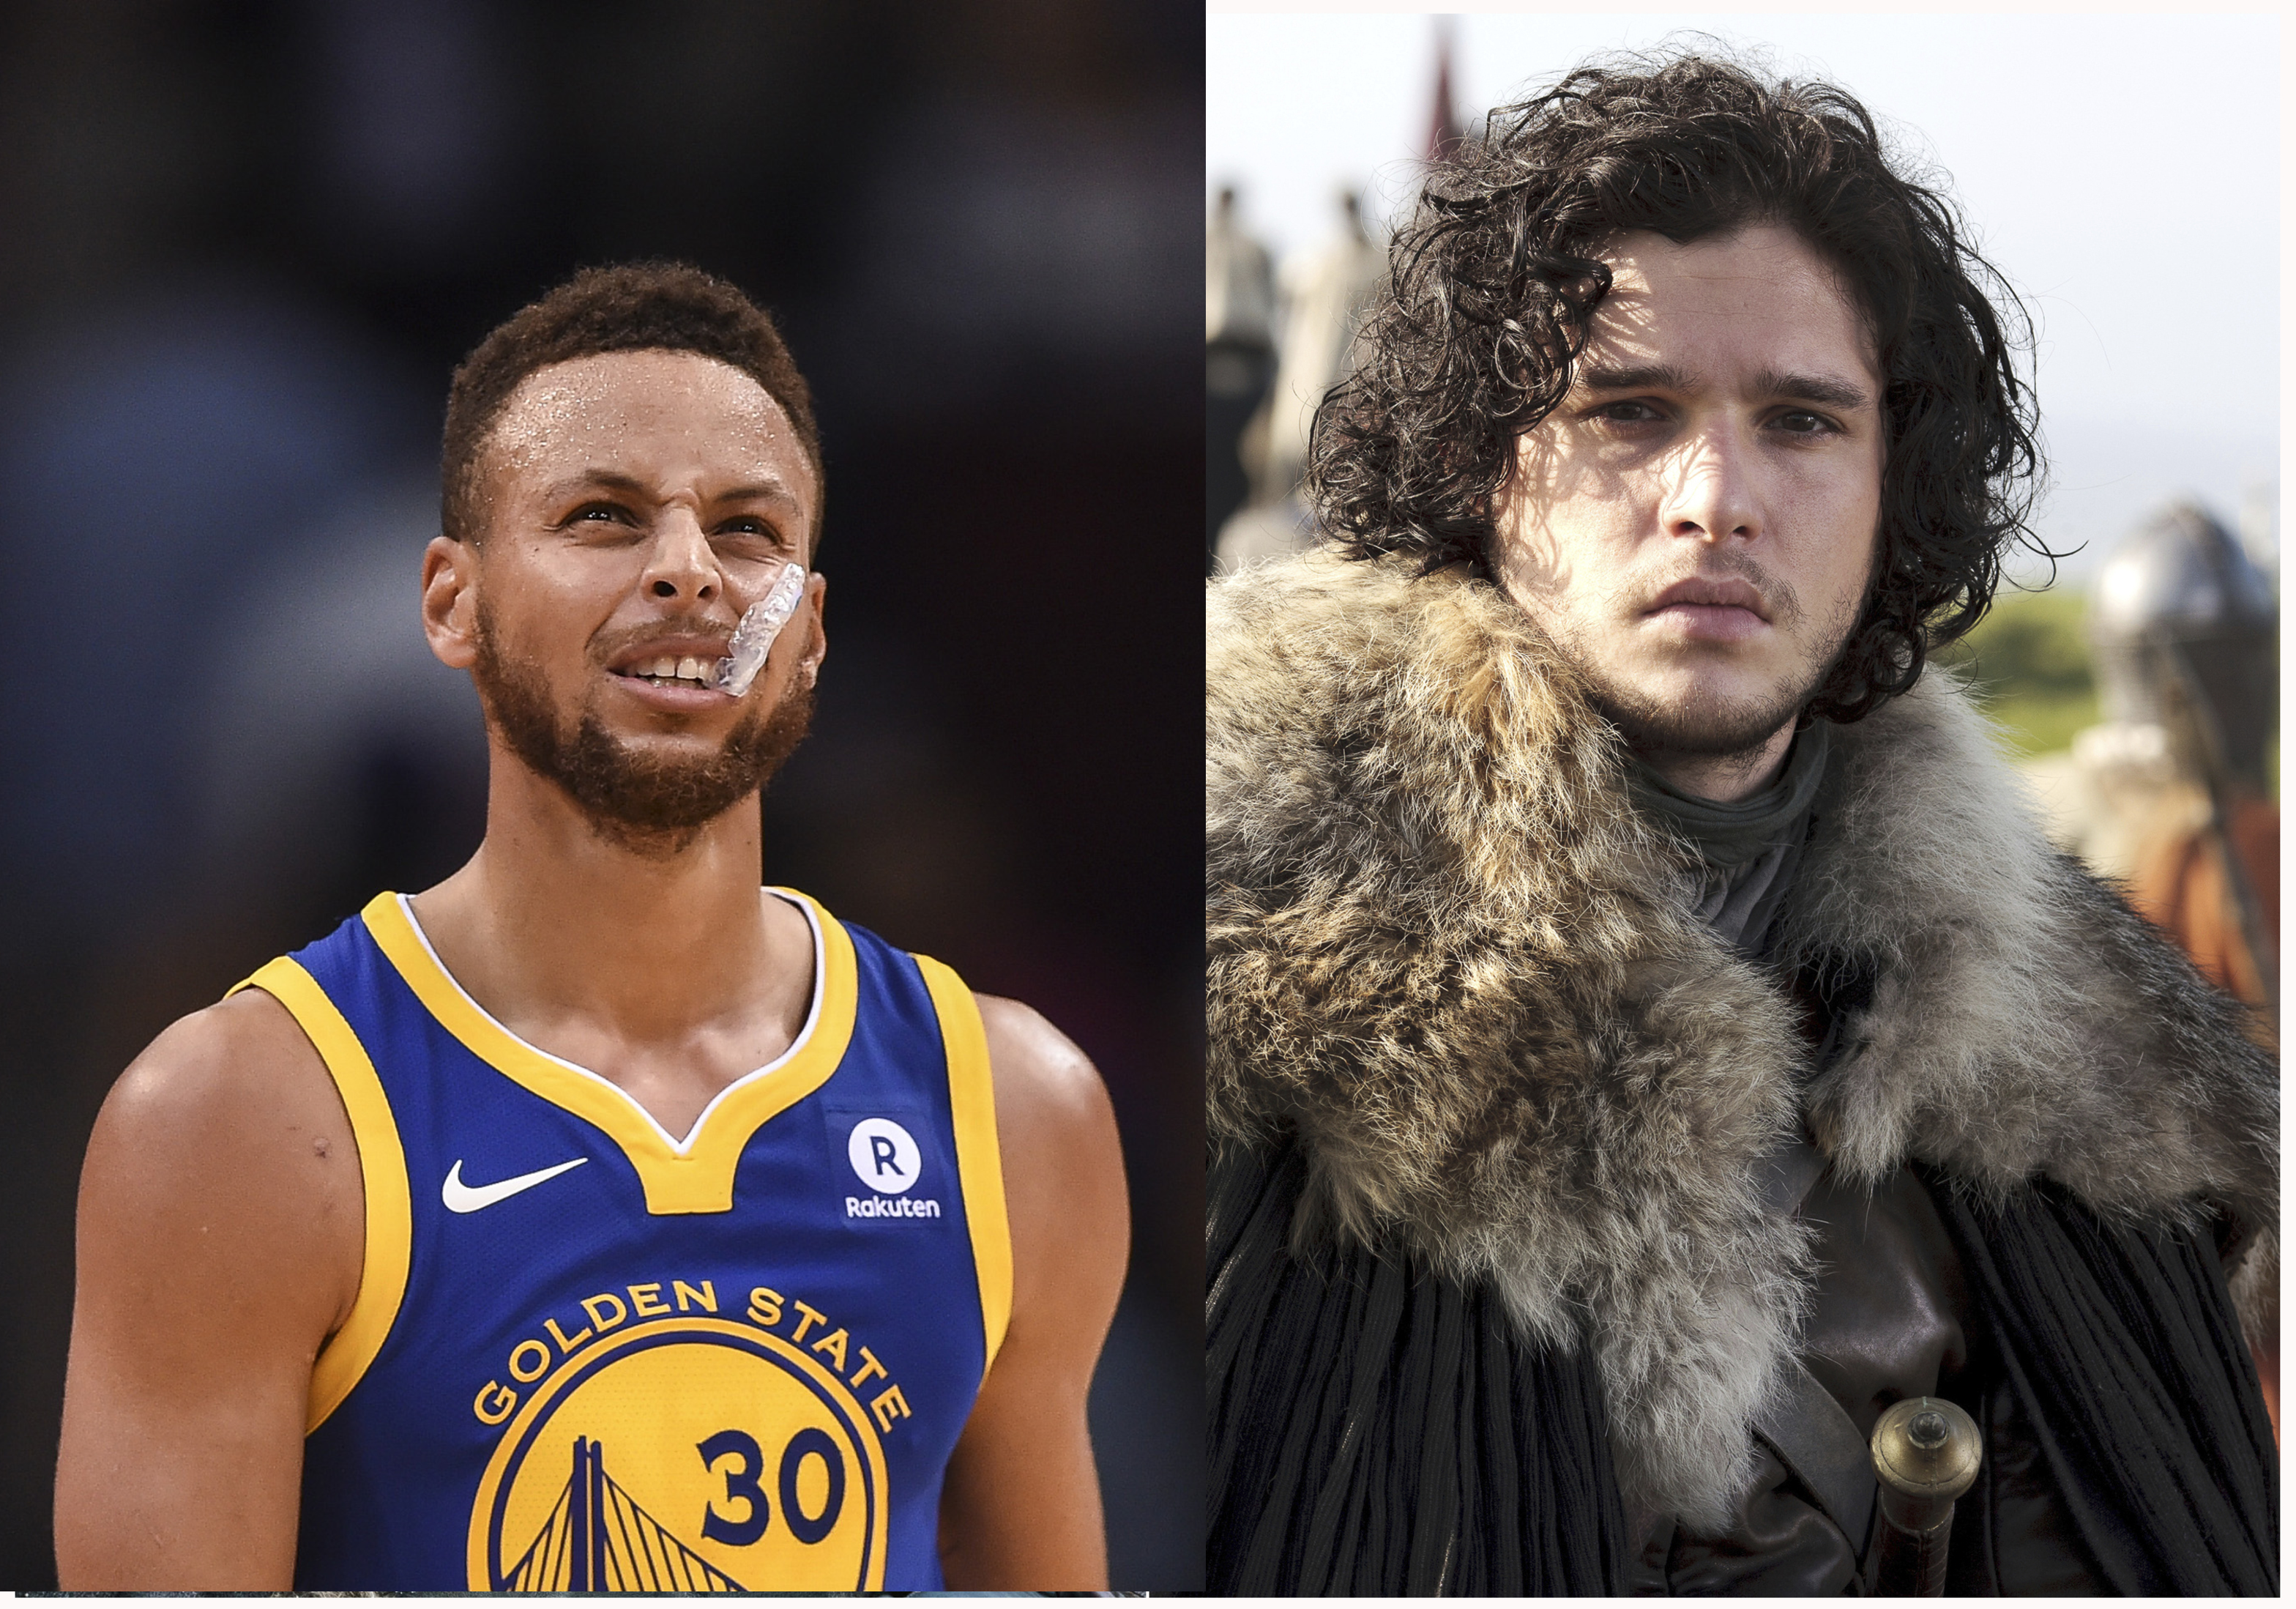 game of thrones basketball jersey